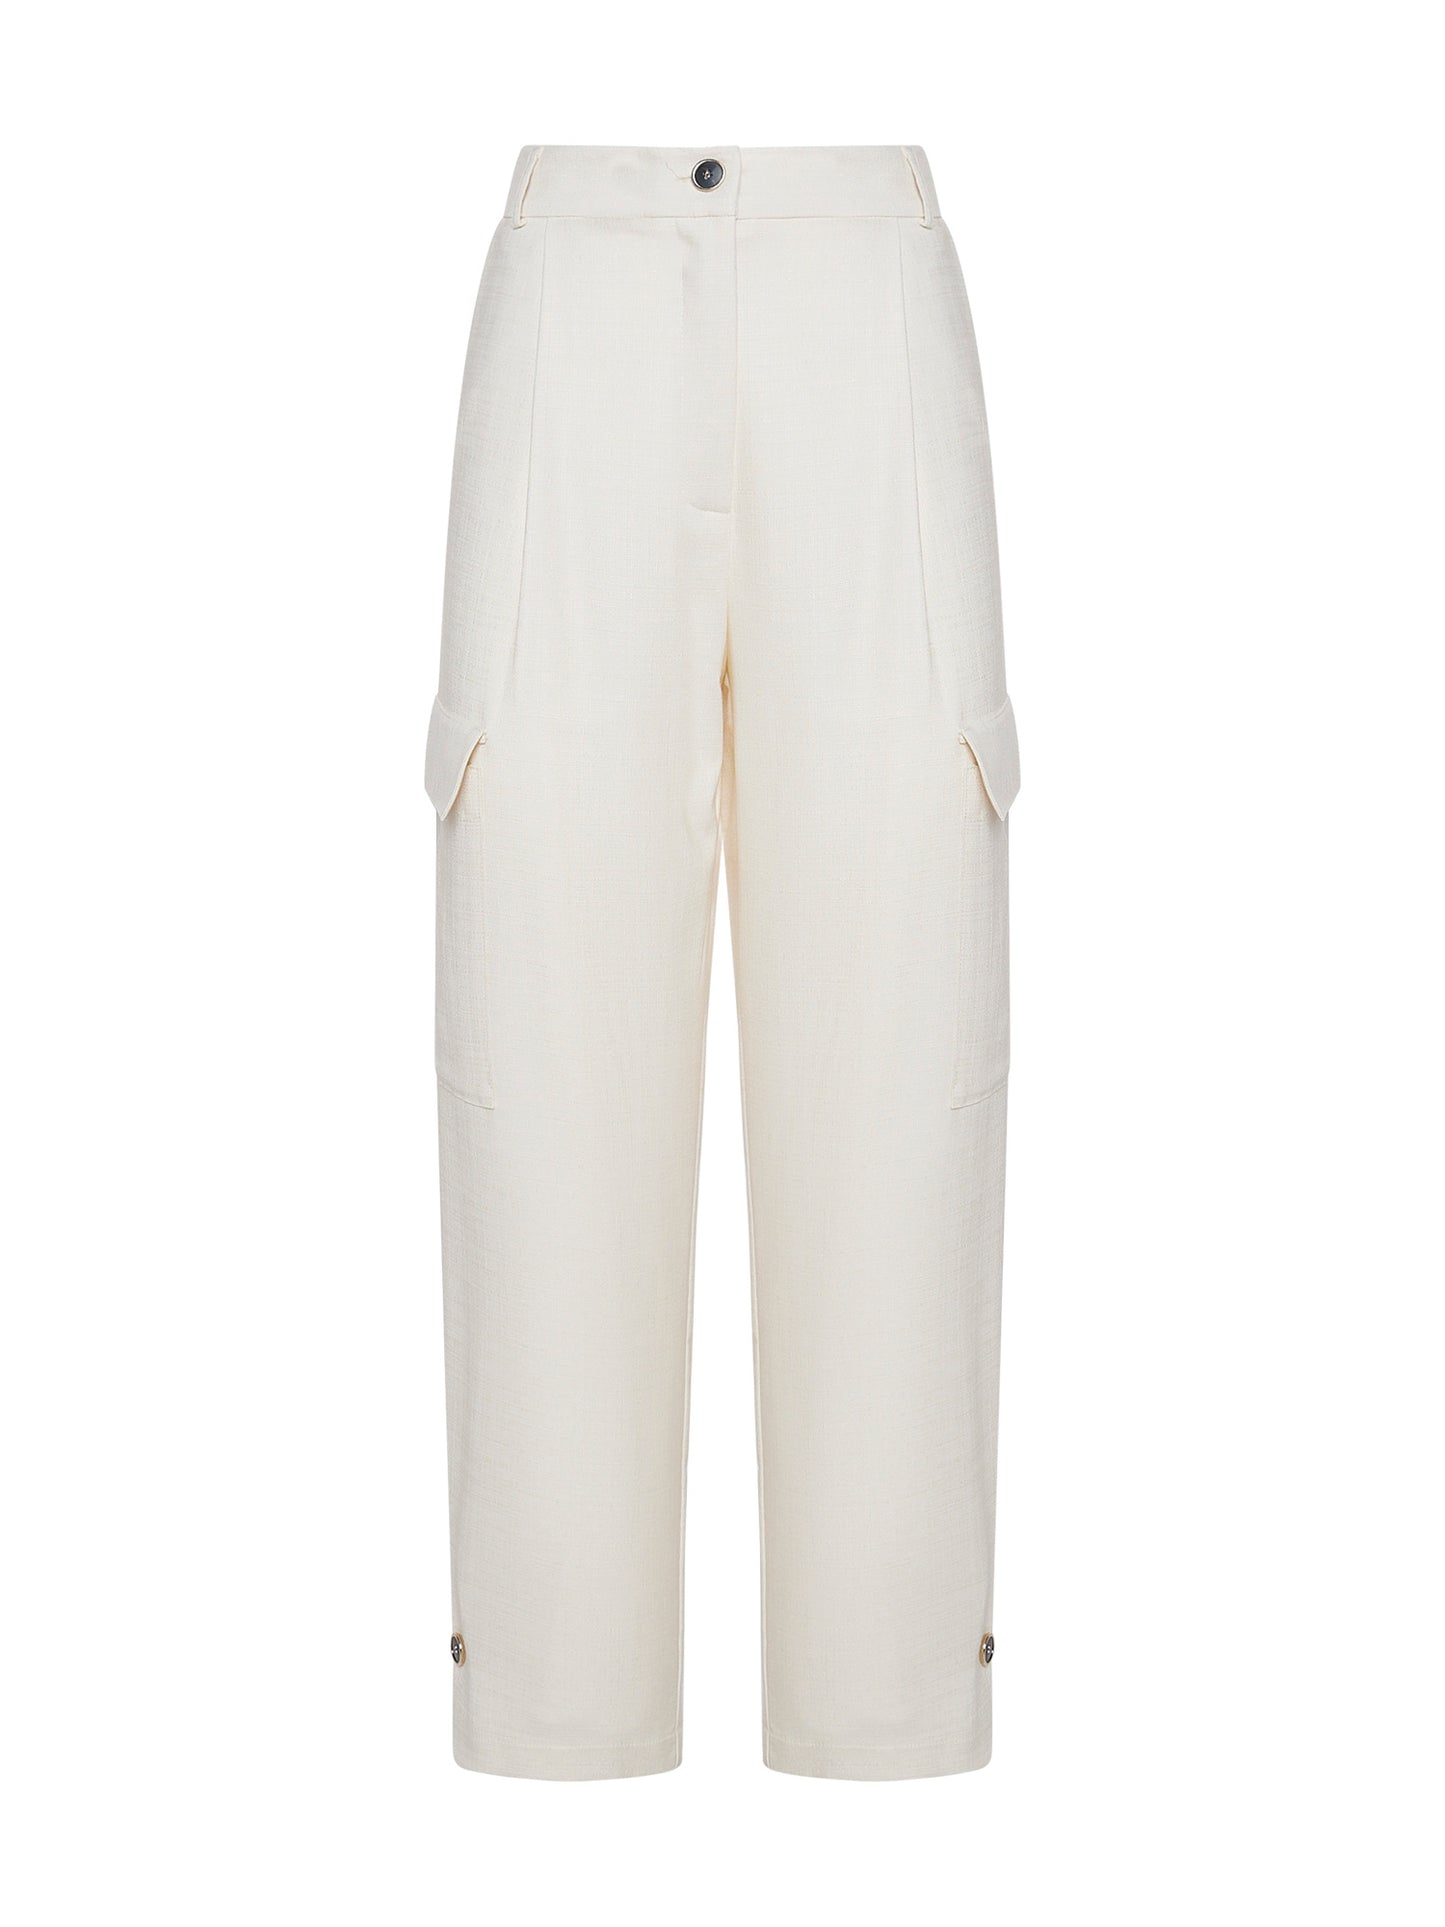 Luxury textured fabric cargo trousers